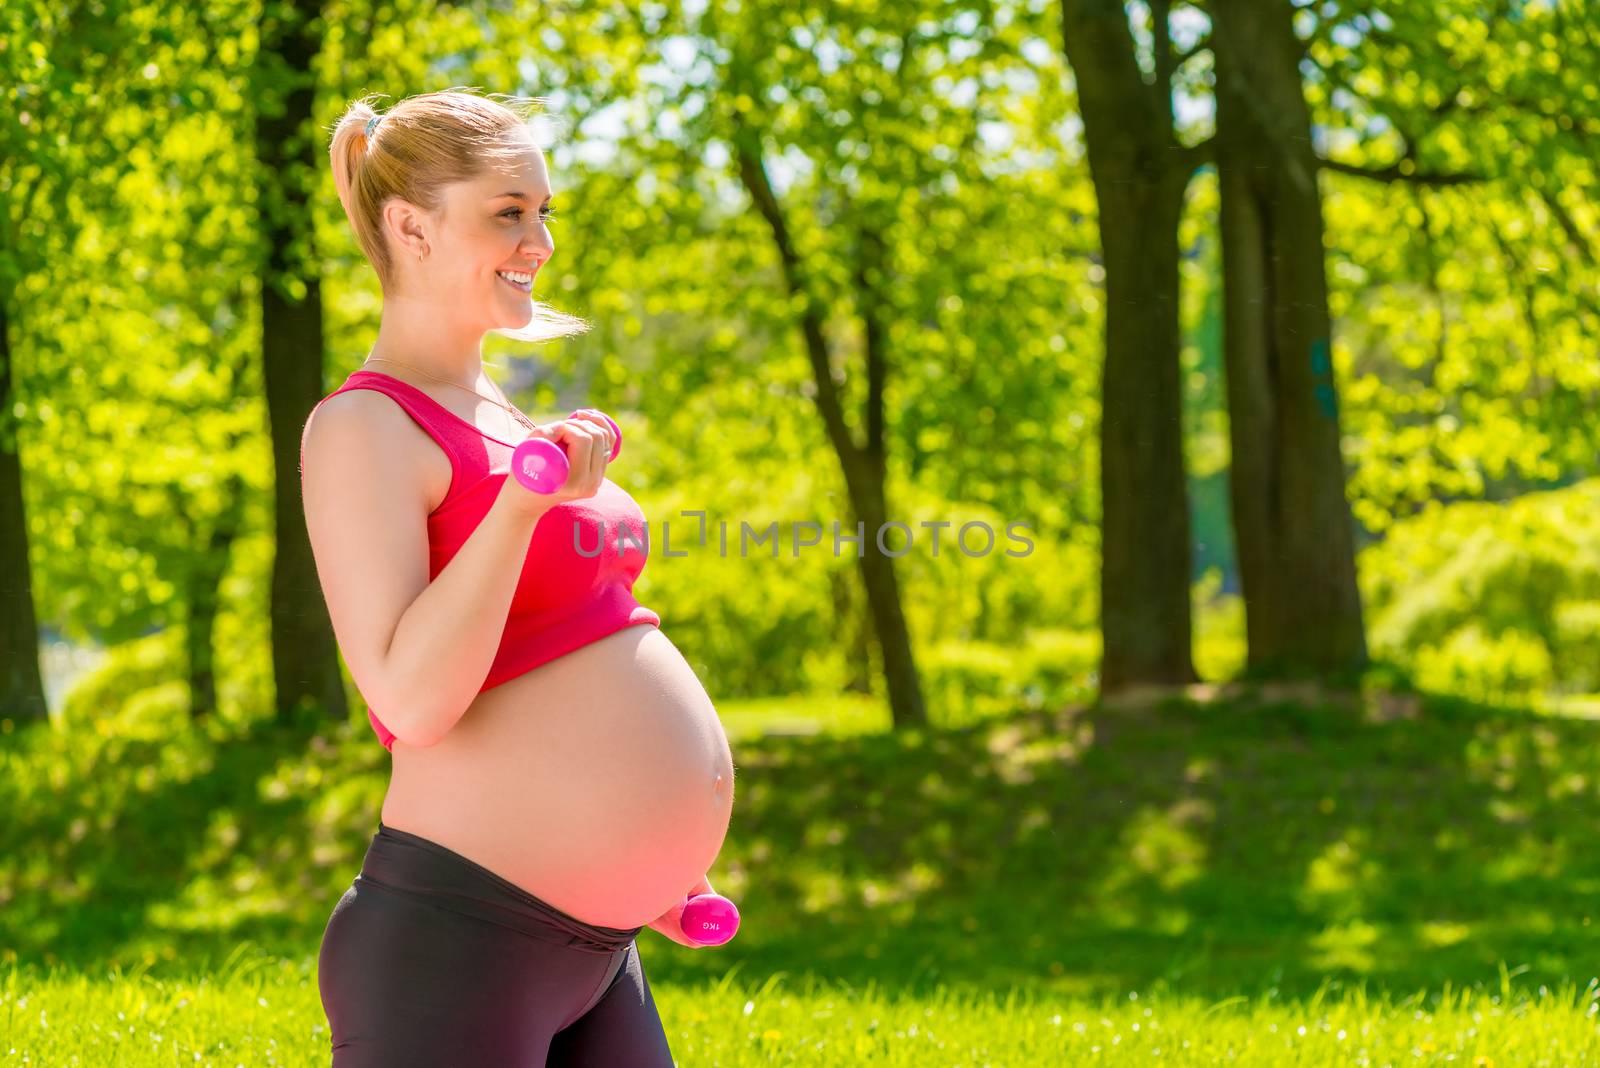 playing sports during pregnancy in the fresh air is good for health